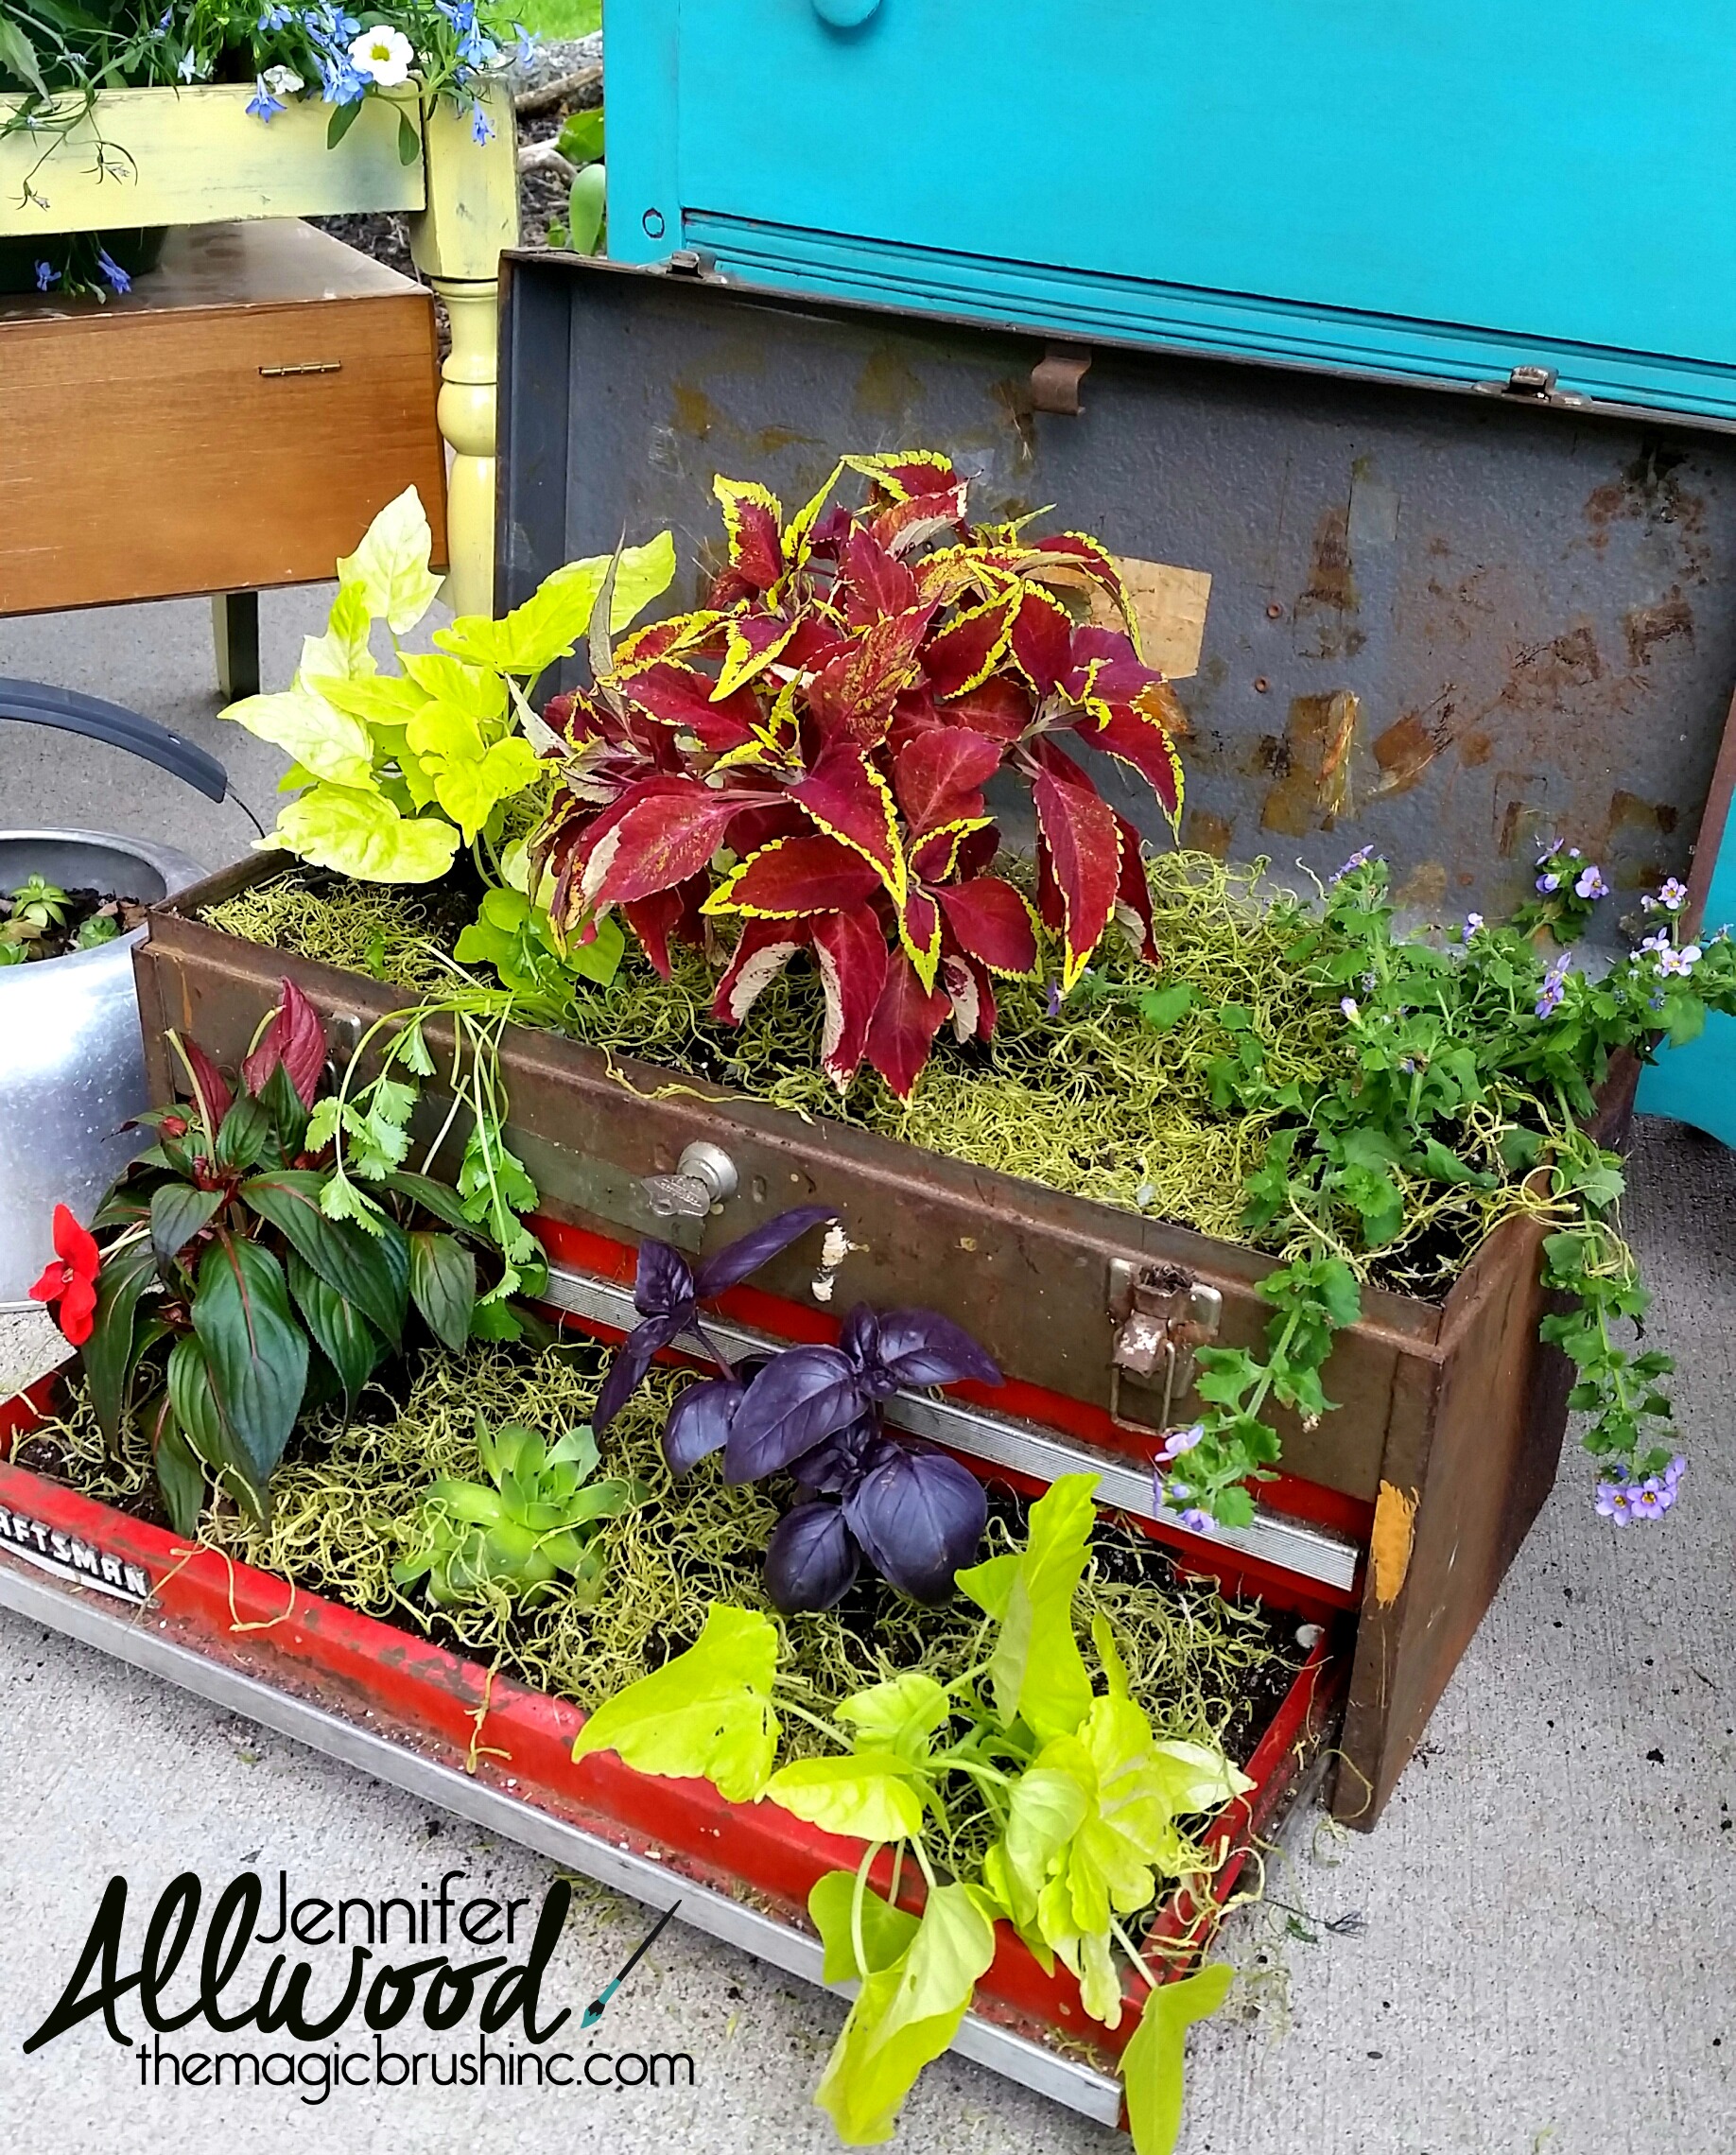 10 creative container ideas …. for people who love the container more than the growing!